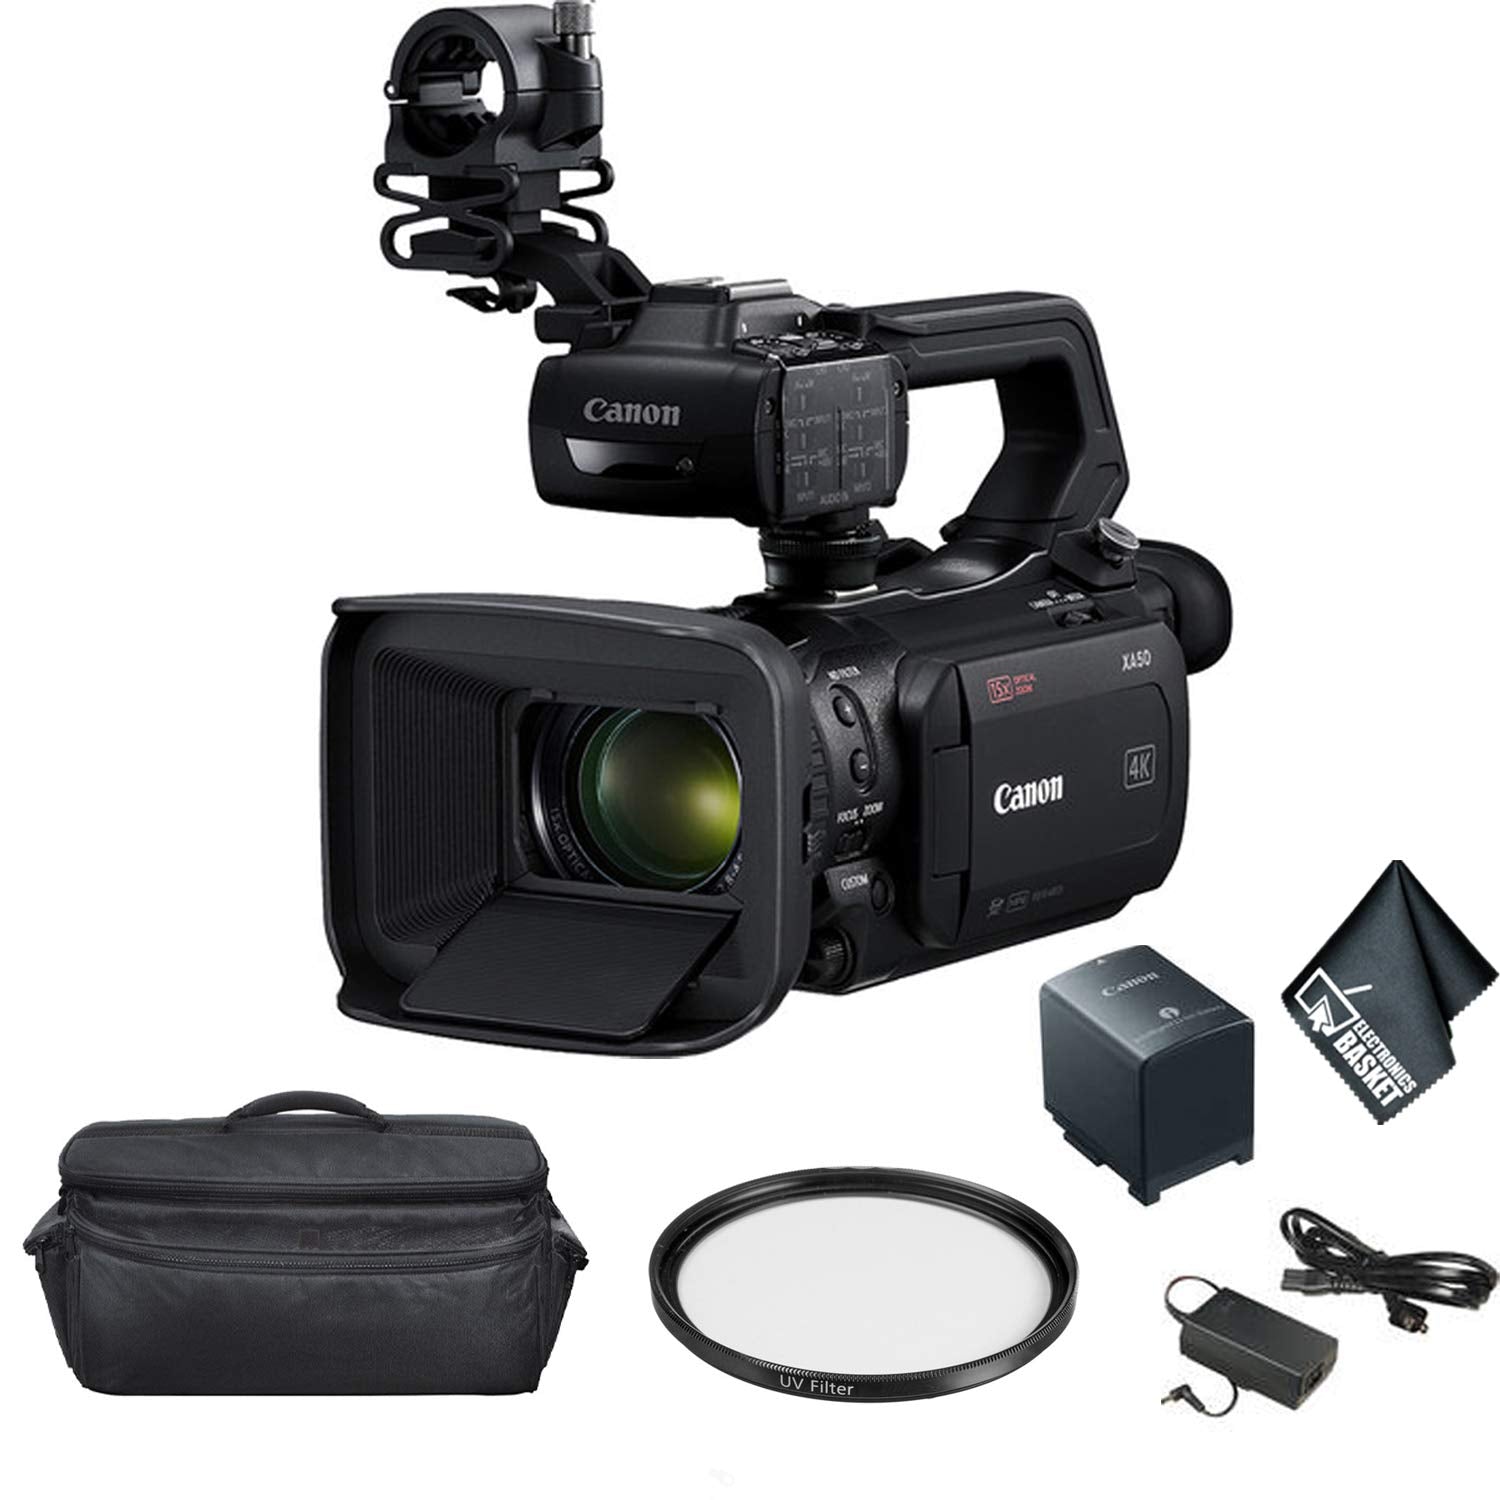 Canon XA50 Professional UHD 4K Camcorder Bundle with Carrying Case + More